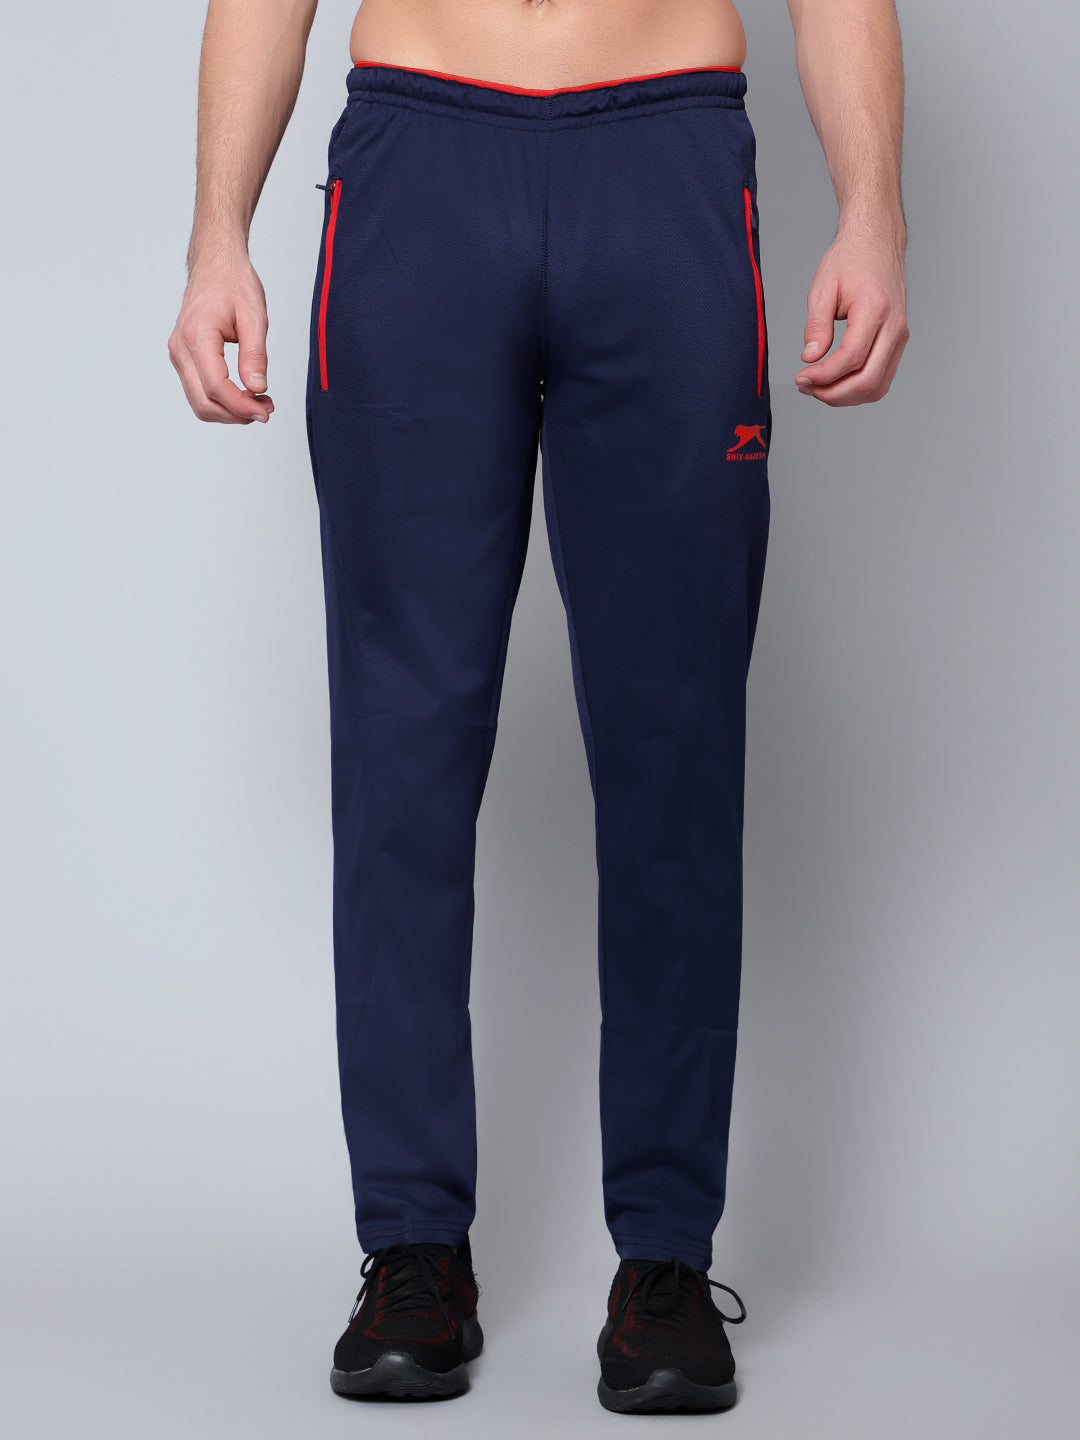 Nike Mens Sportswear Air French Terry Pants  Dicks Sporting Goods